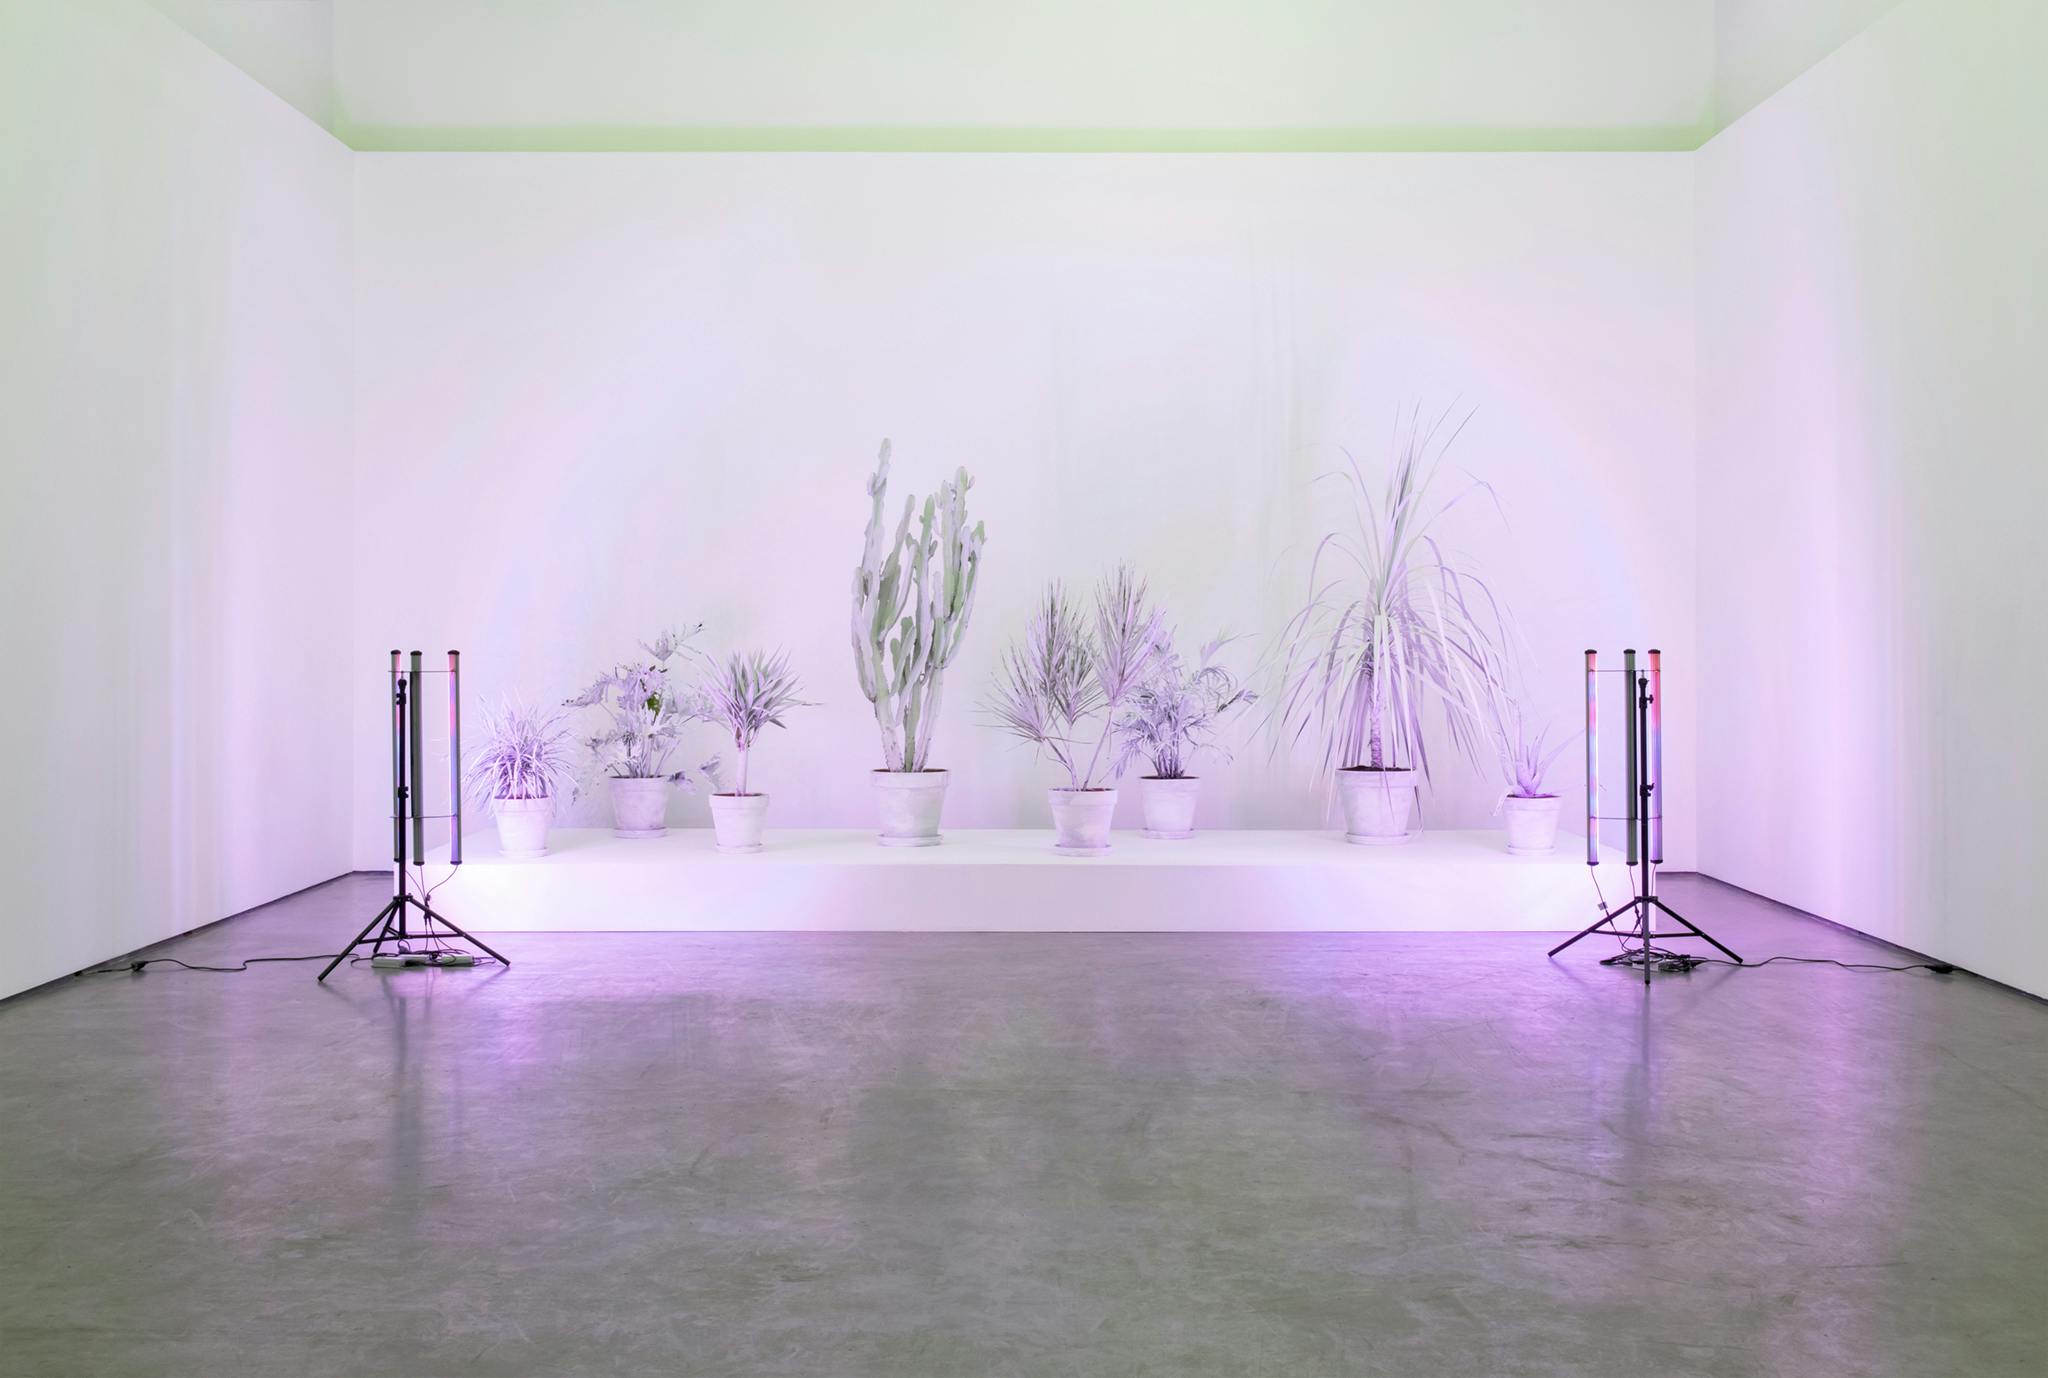 Eight plants of various sizes sit on a white platform. The plants and their pots are painted white. There are bright blue and red lights, pointed towards the plants, casting a pink hue in the space.